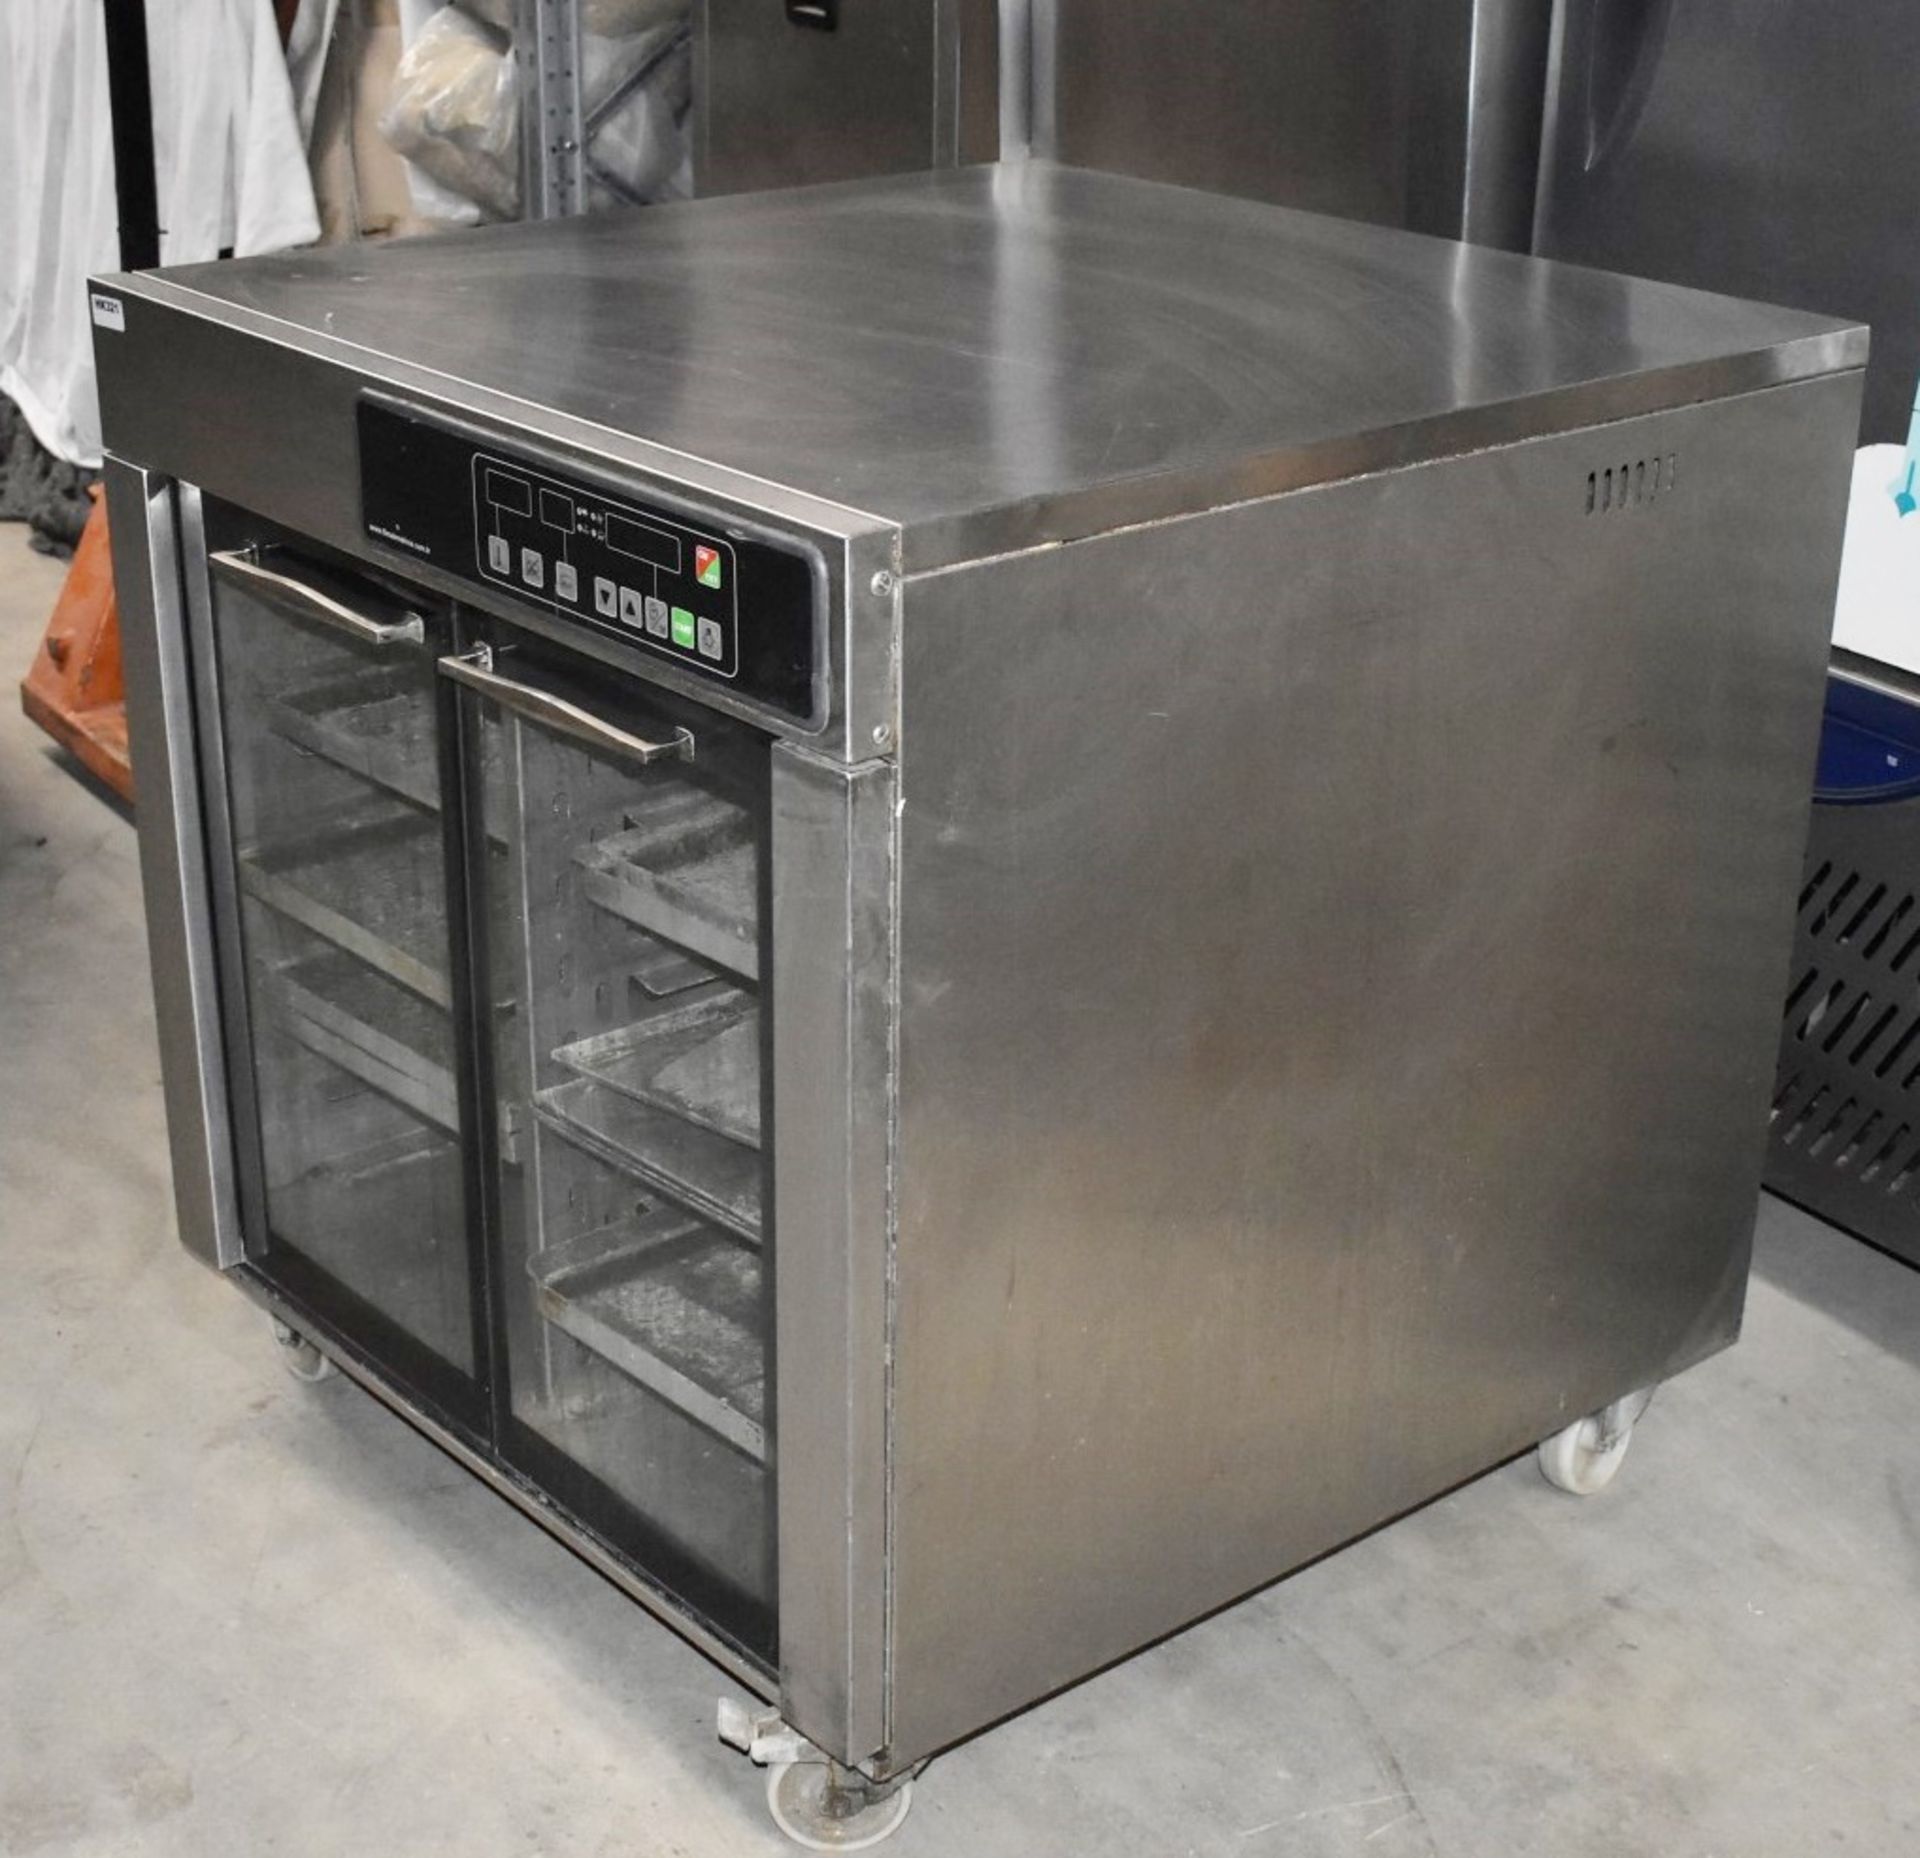 1 x FiMAK Windrose FW10 Convection Baking Oven - 240v - Size: 95 x 95 x 95 cms - Ref : HK321 WH2 B5G - Image 8 of 8